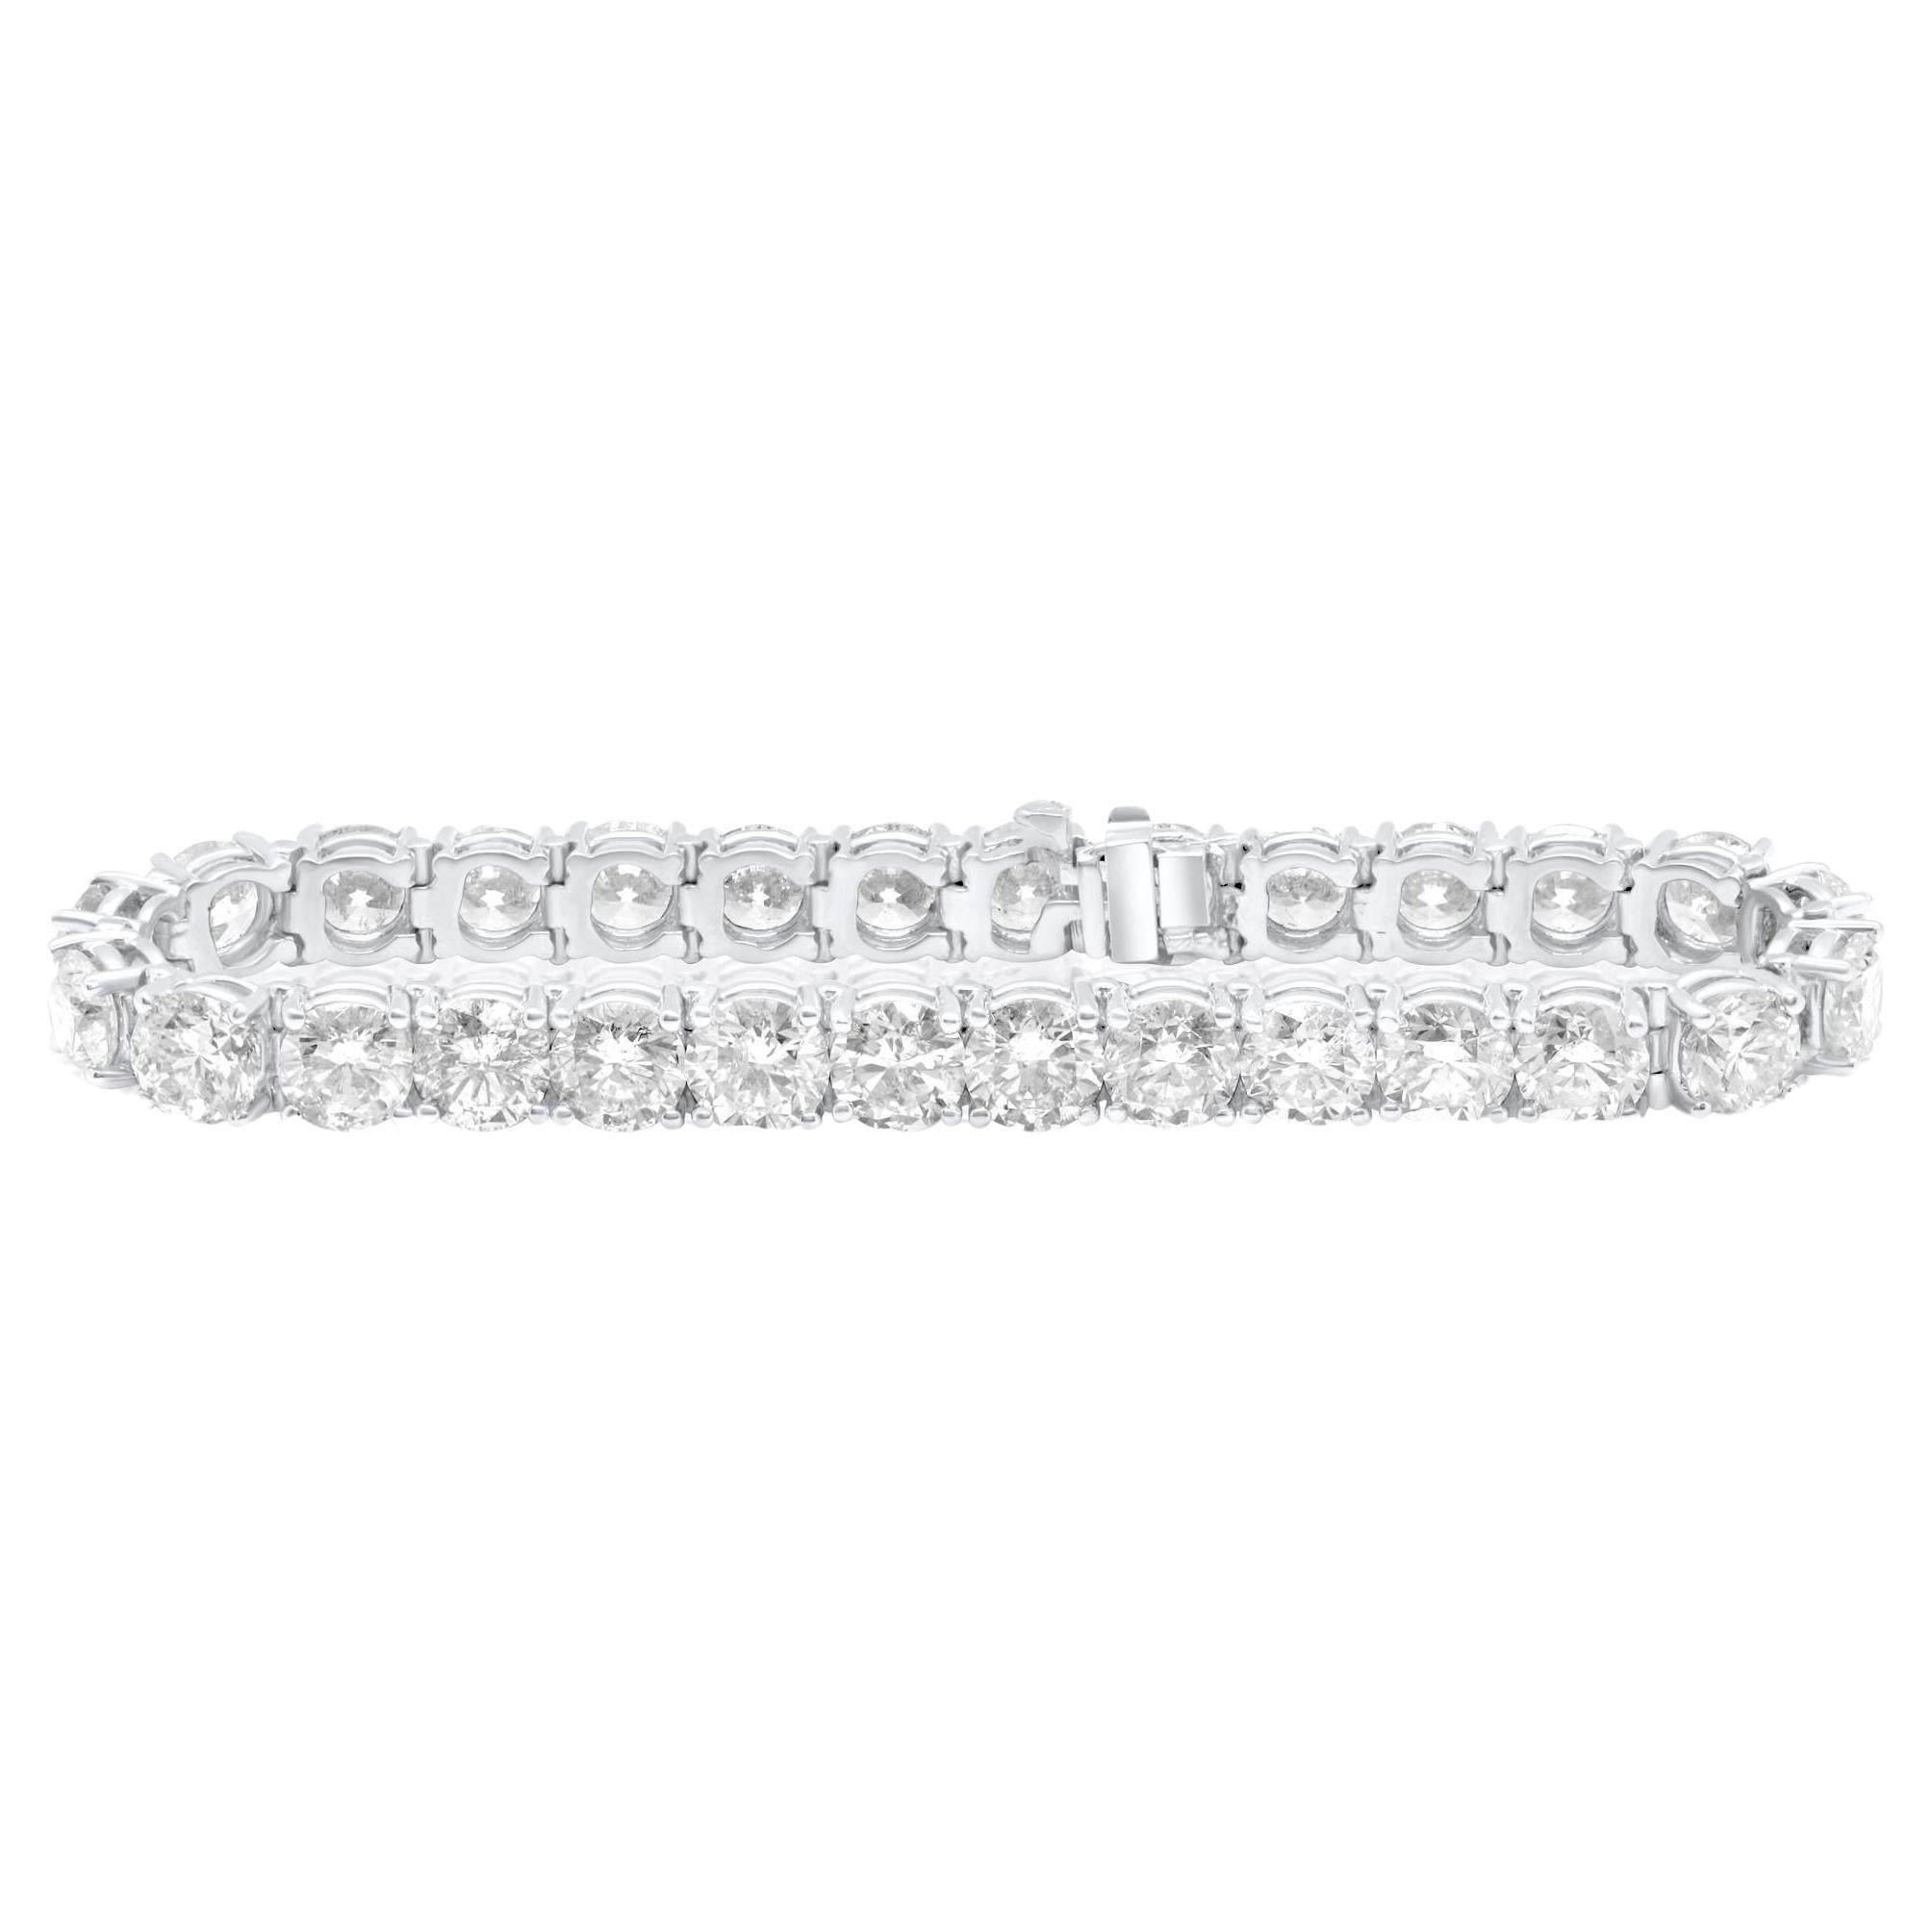 Diana M. 18 kt white gold 4 prong diamond tennis bracelet adorned with 14.20 cts For Sale